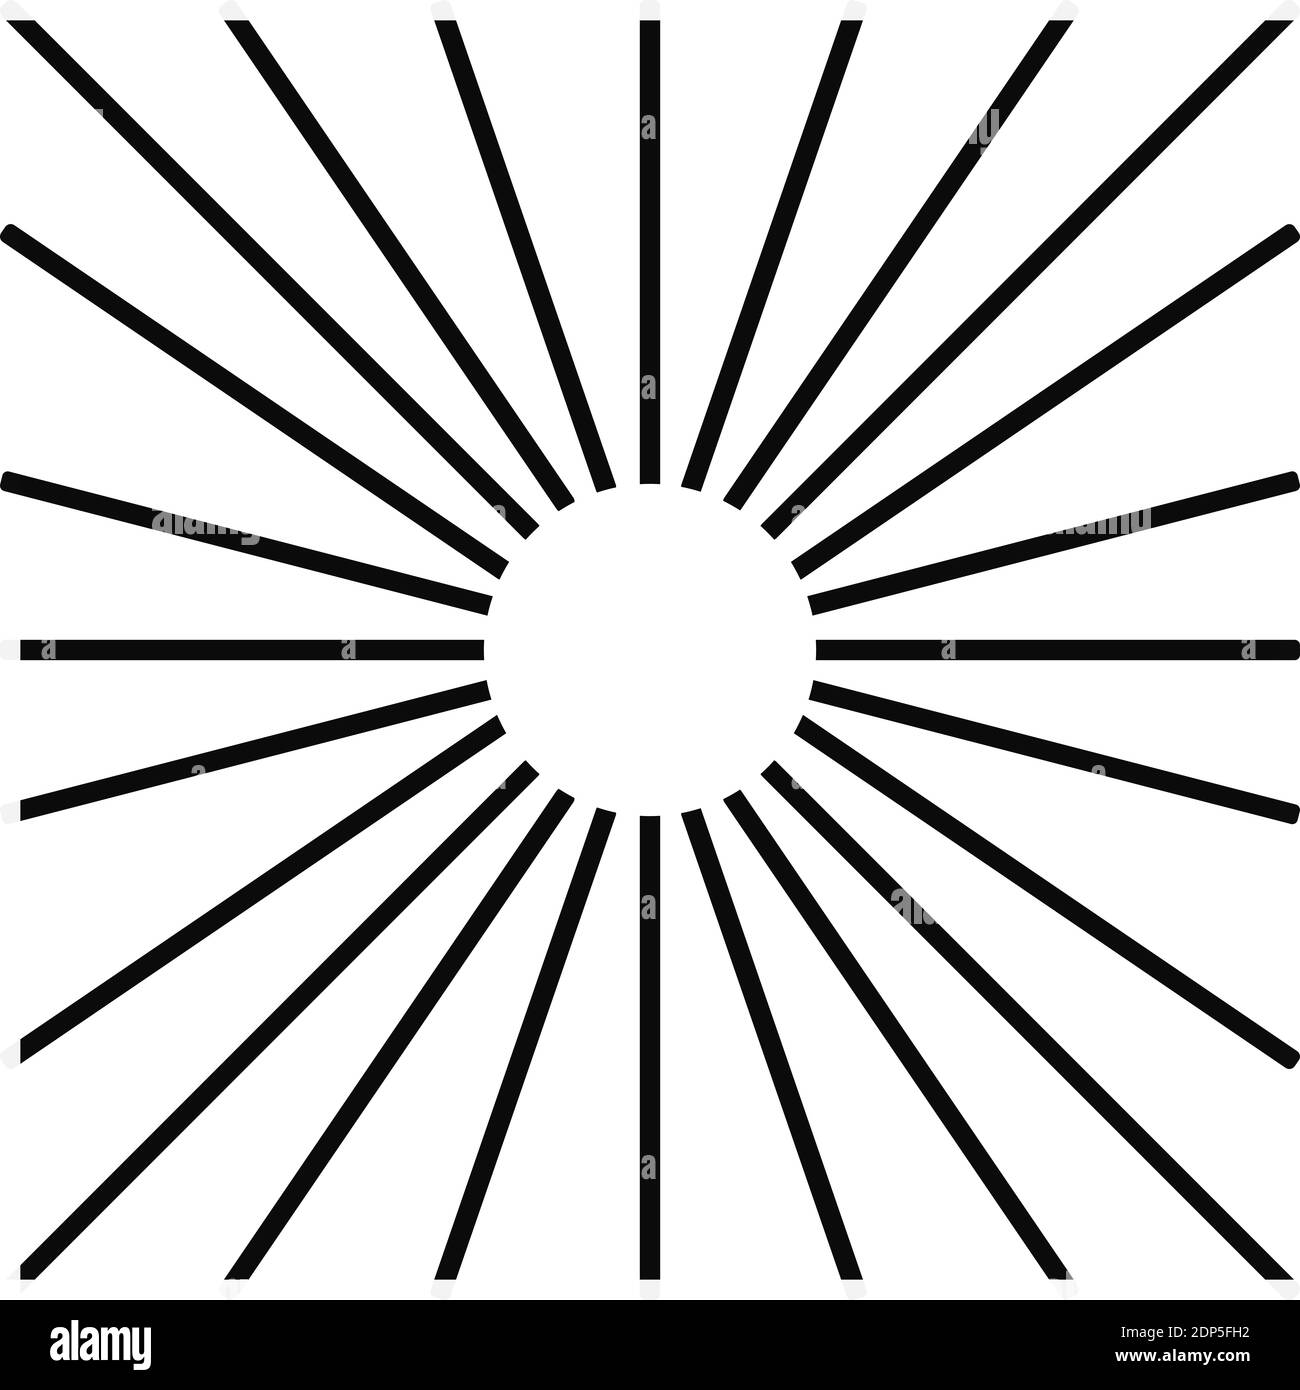 Radial lines abstract geometric element. Spokes, radiating stripes. Stylized black and white sun drawing. Stock Photo